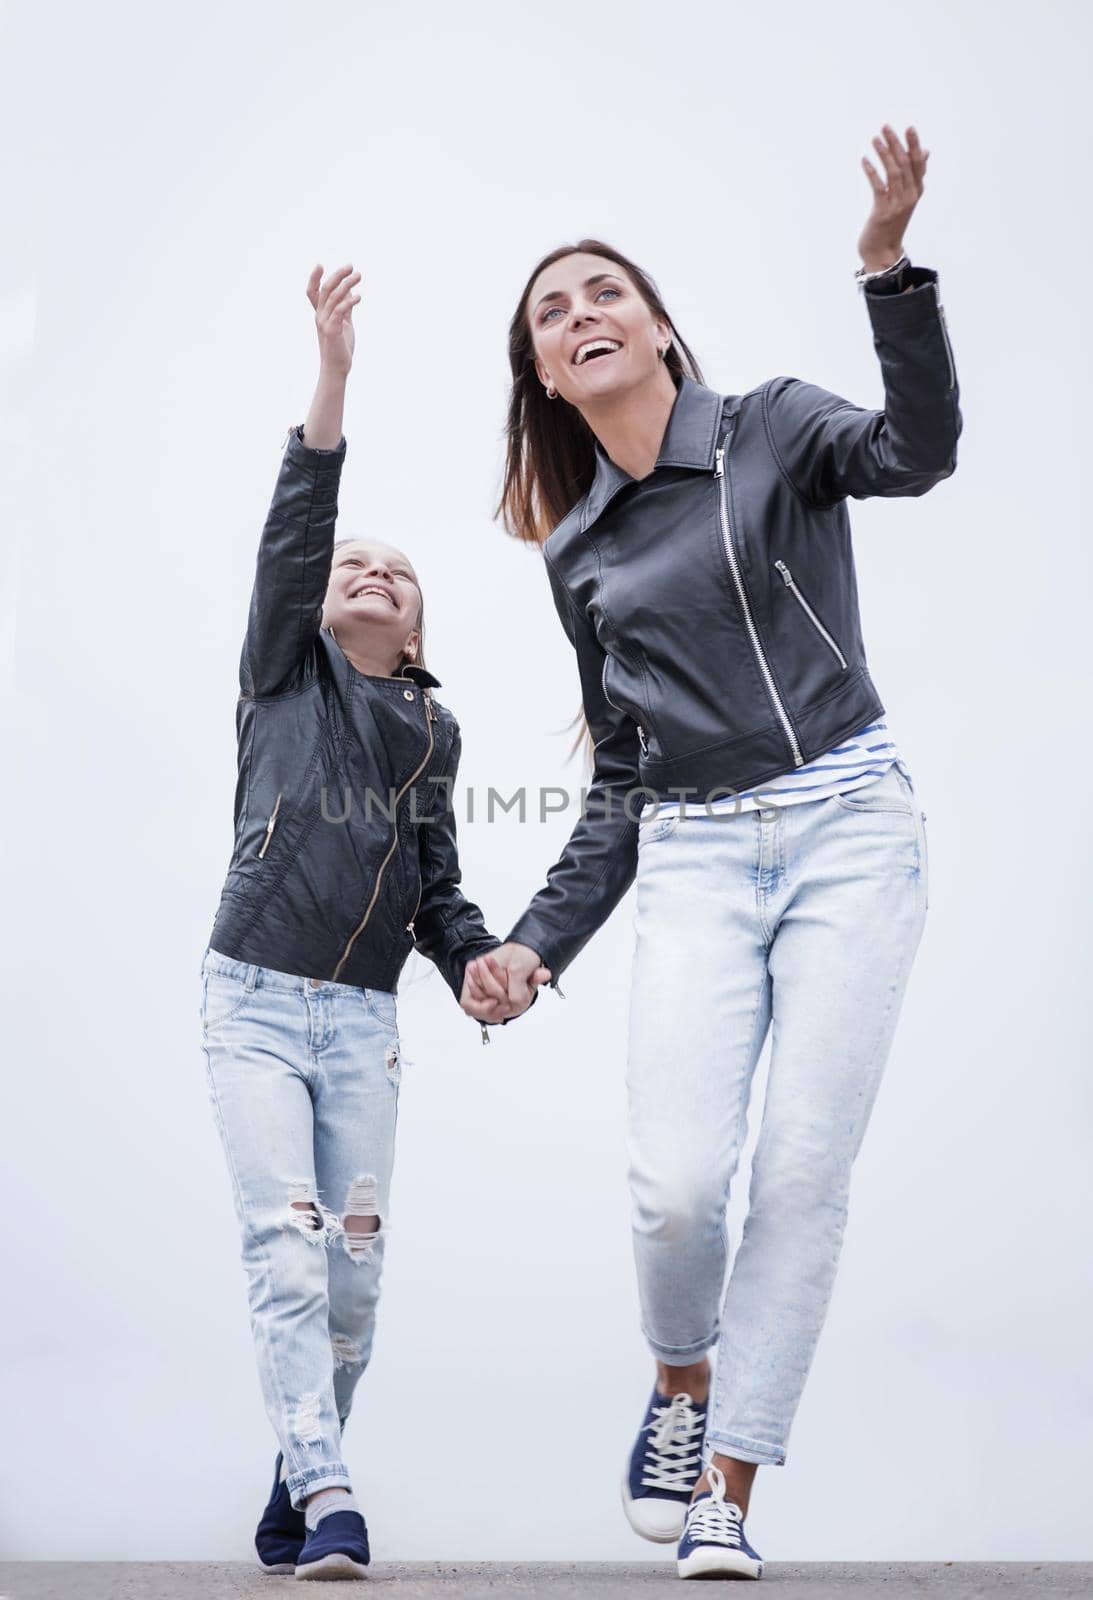 in full growth.happy mother and daughter walking together.photo with copy space